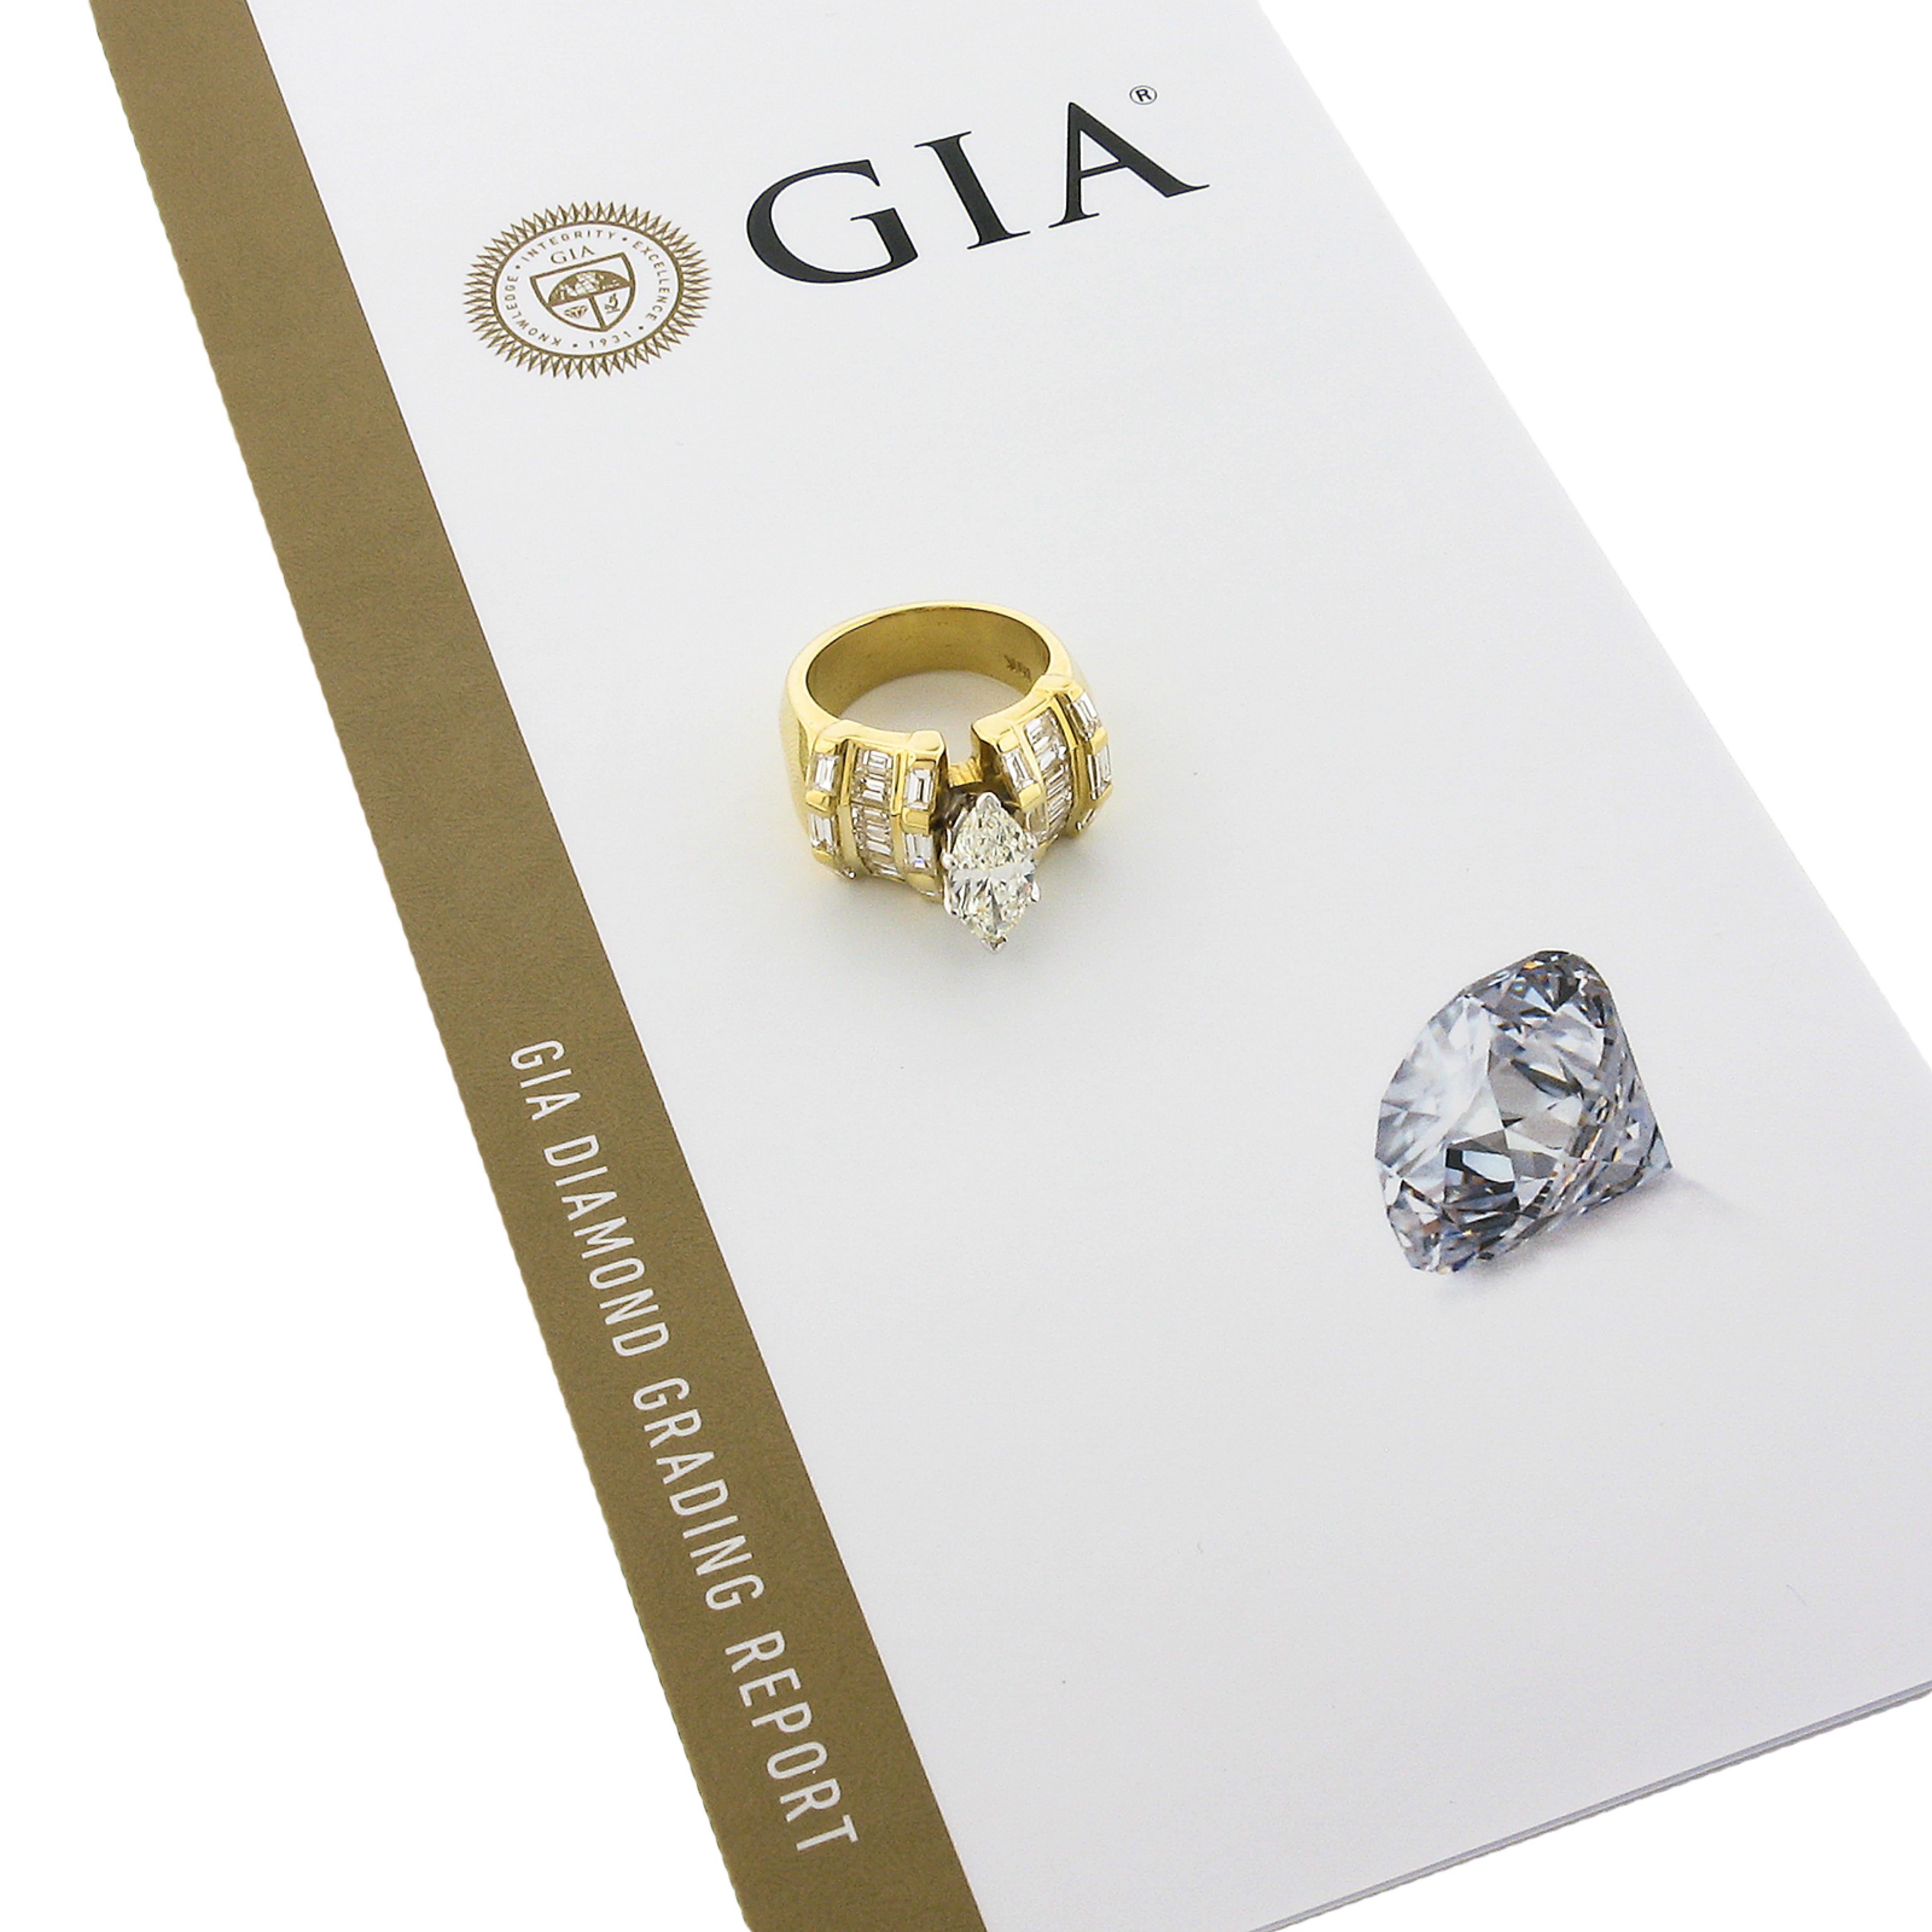 You are looking at a magnificent diamond engagement style ring that was very well crafted from solid 18k yellow gold. It features a truly breathtaking, GIA certified, marquise brilliant cut diamond solitaire neatly set with sturdy prongs at its